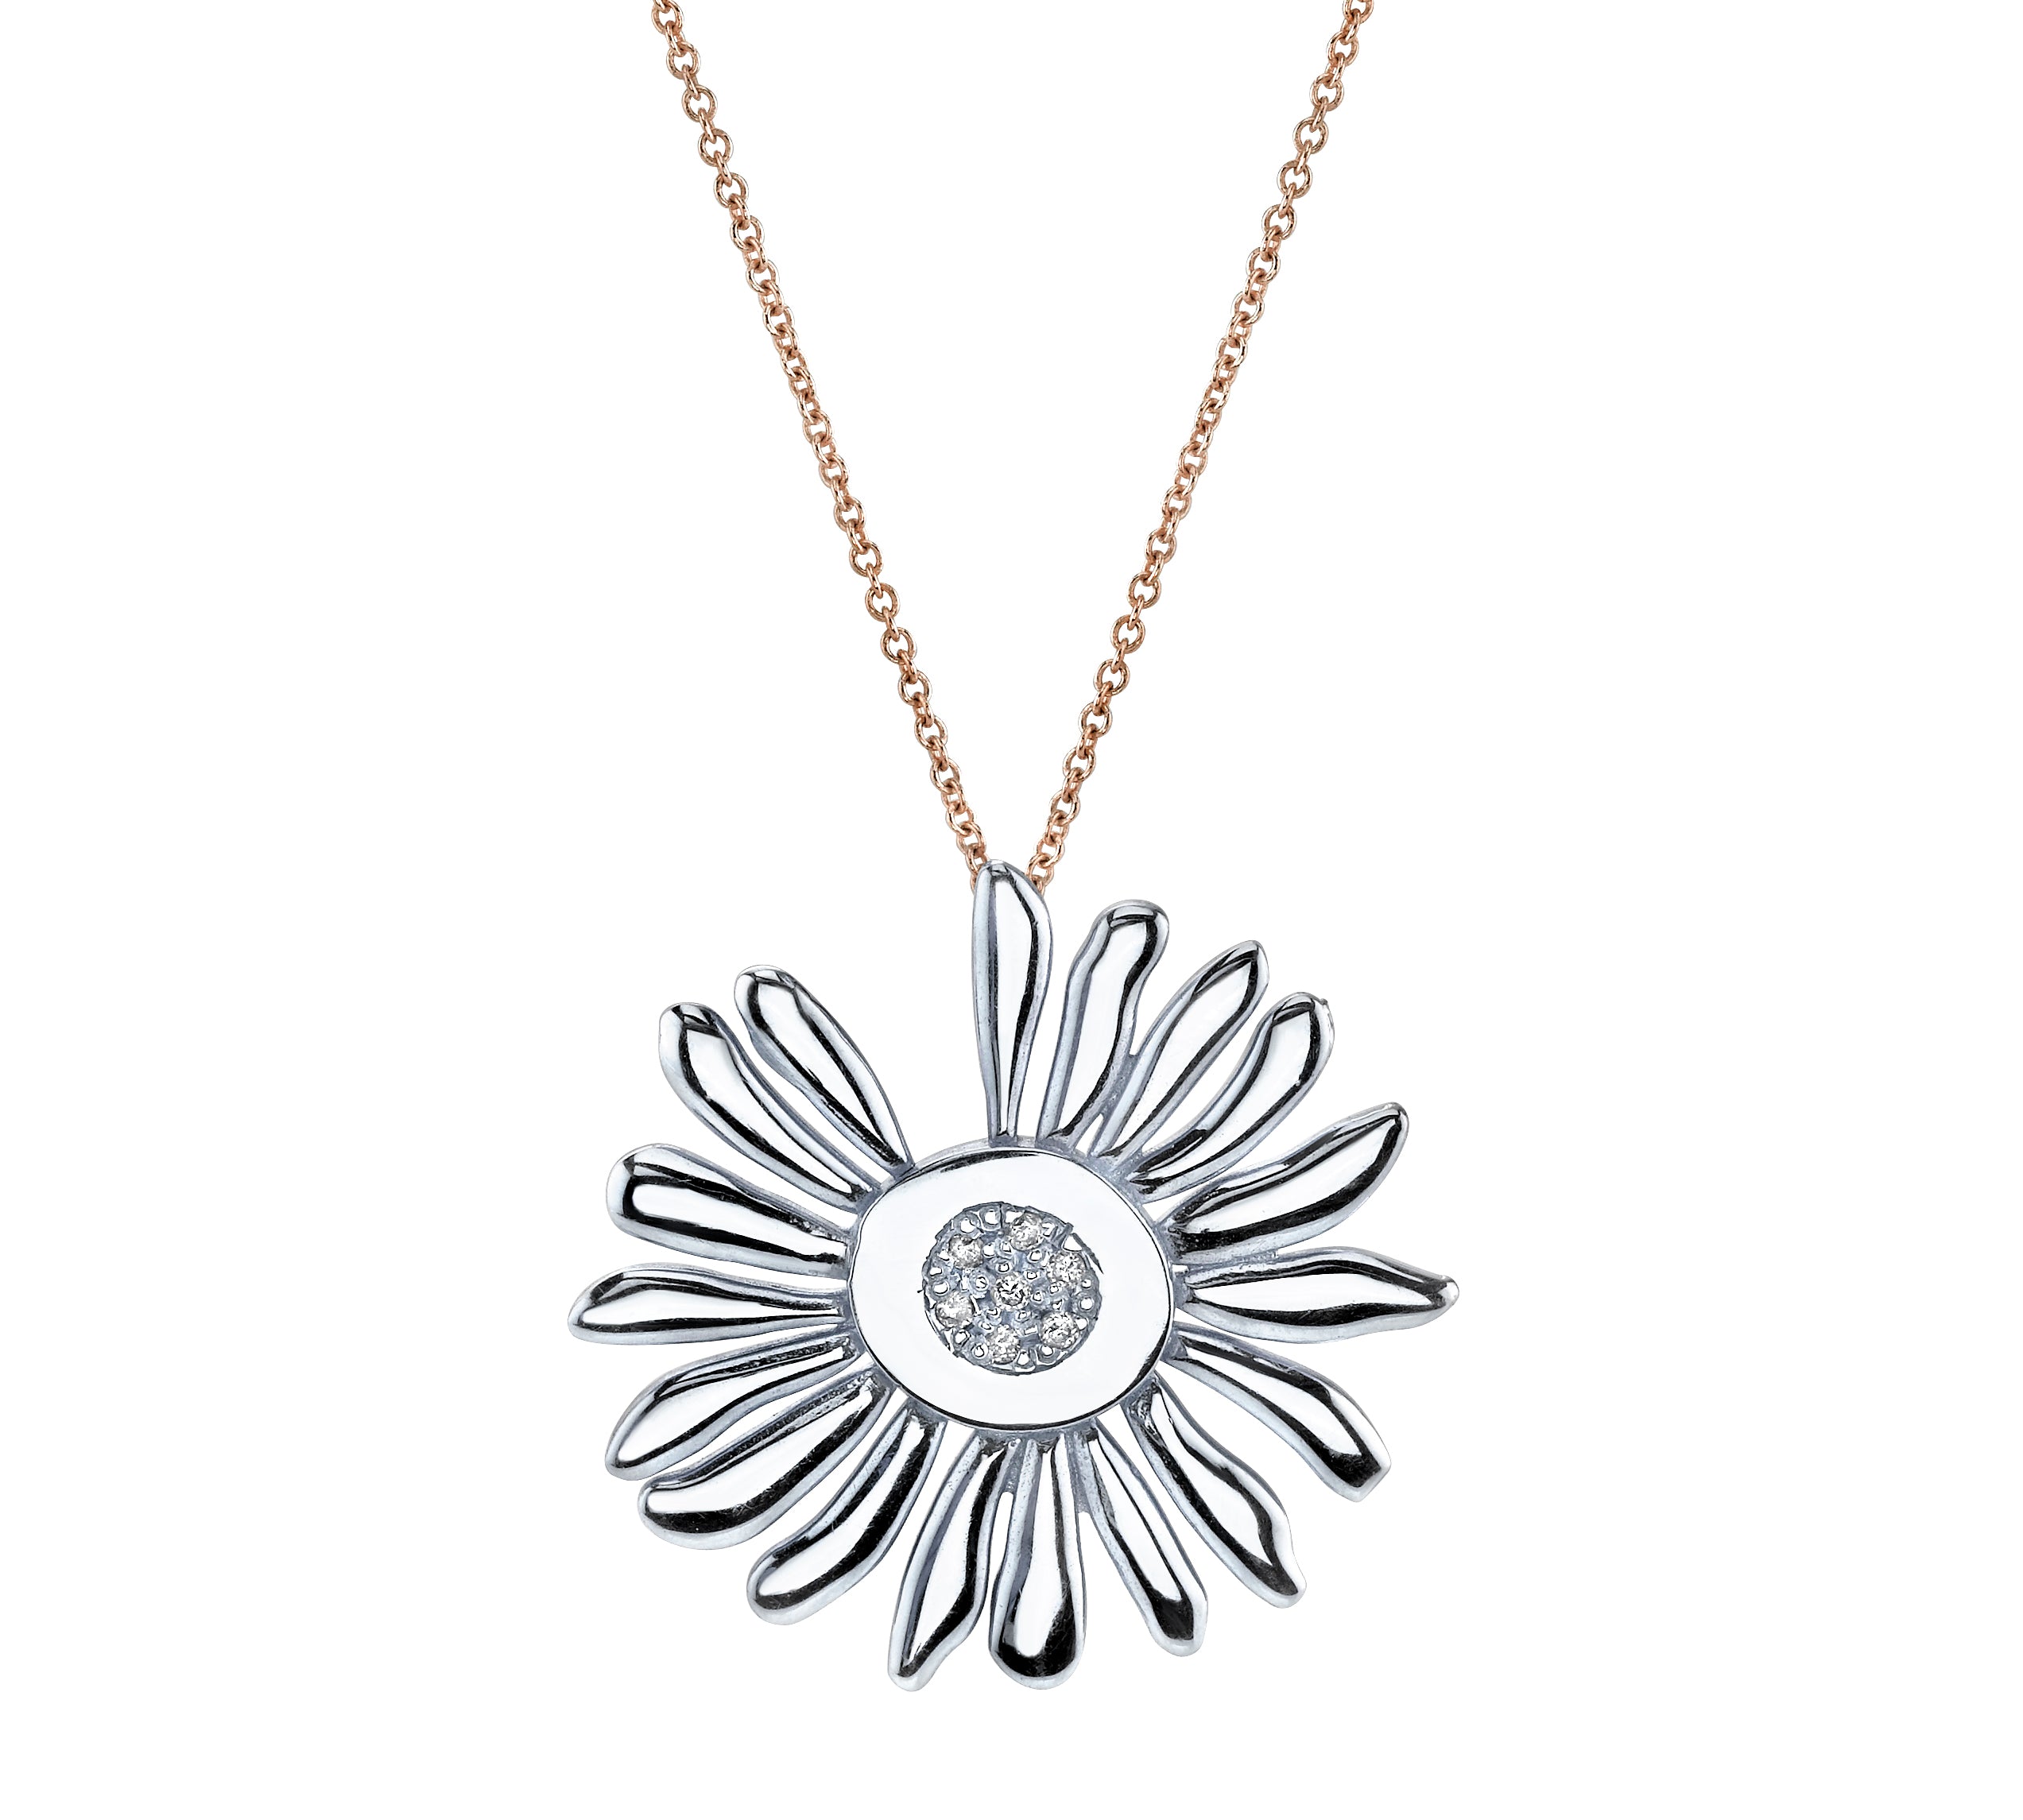 The Daisy Necklace Pendant Roseark Jewelry White Gold  